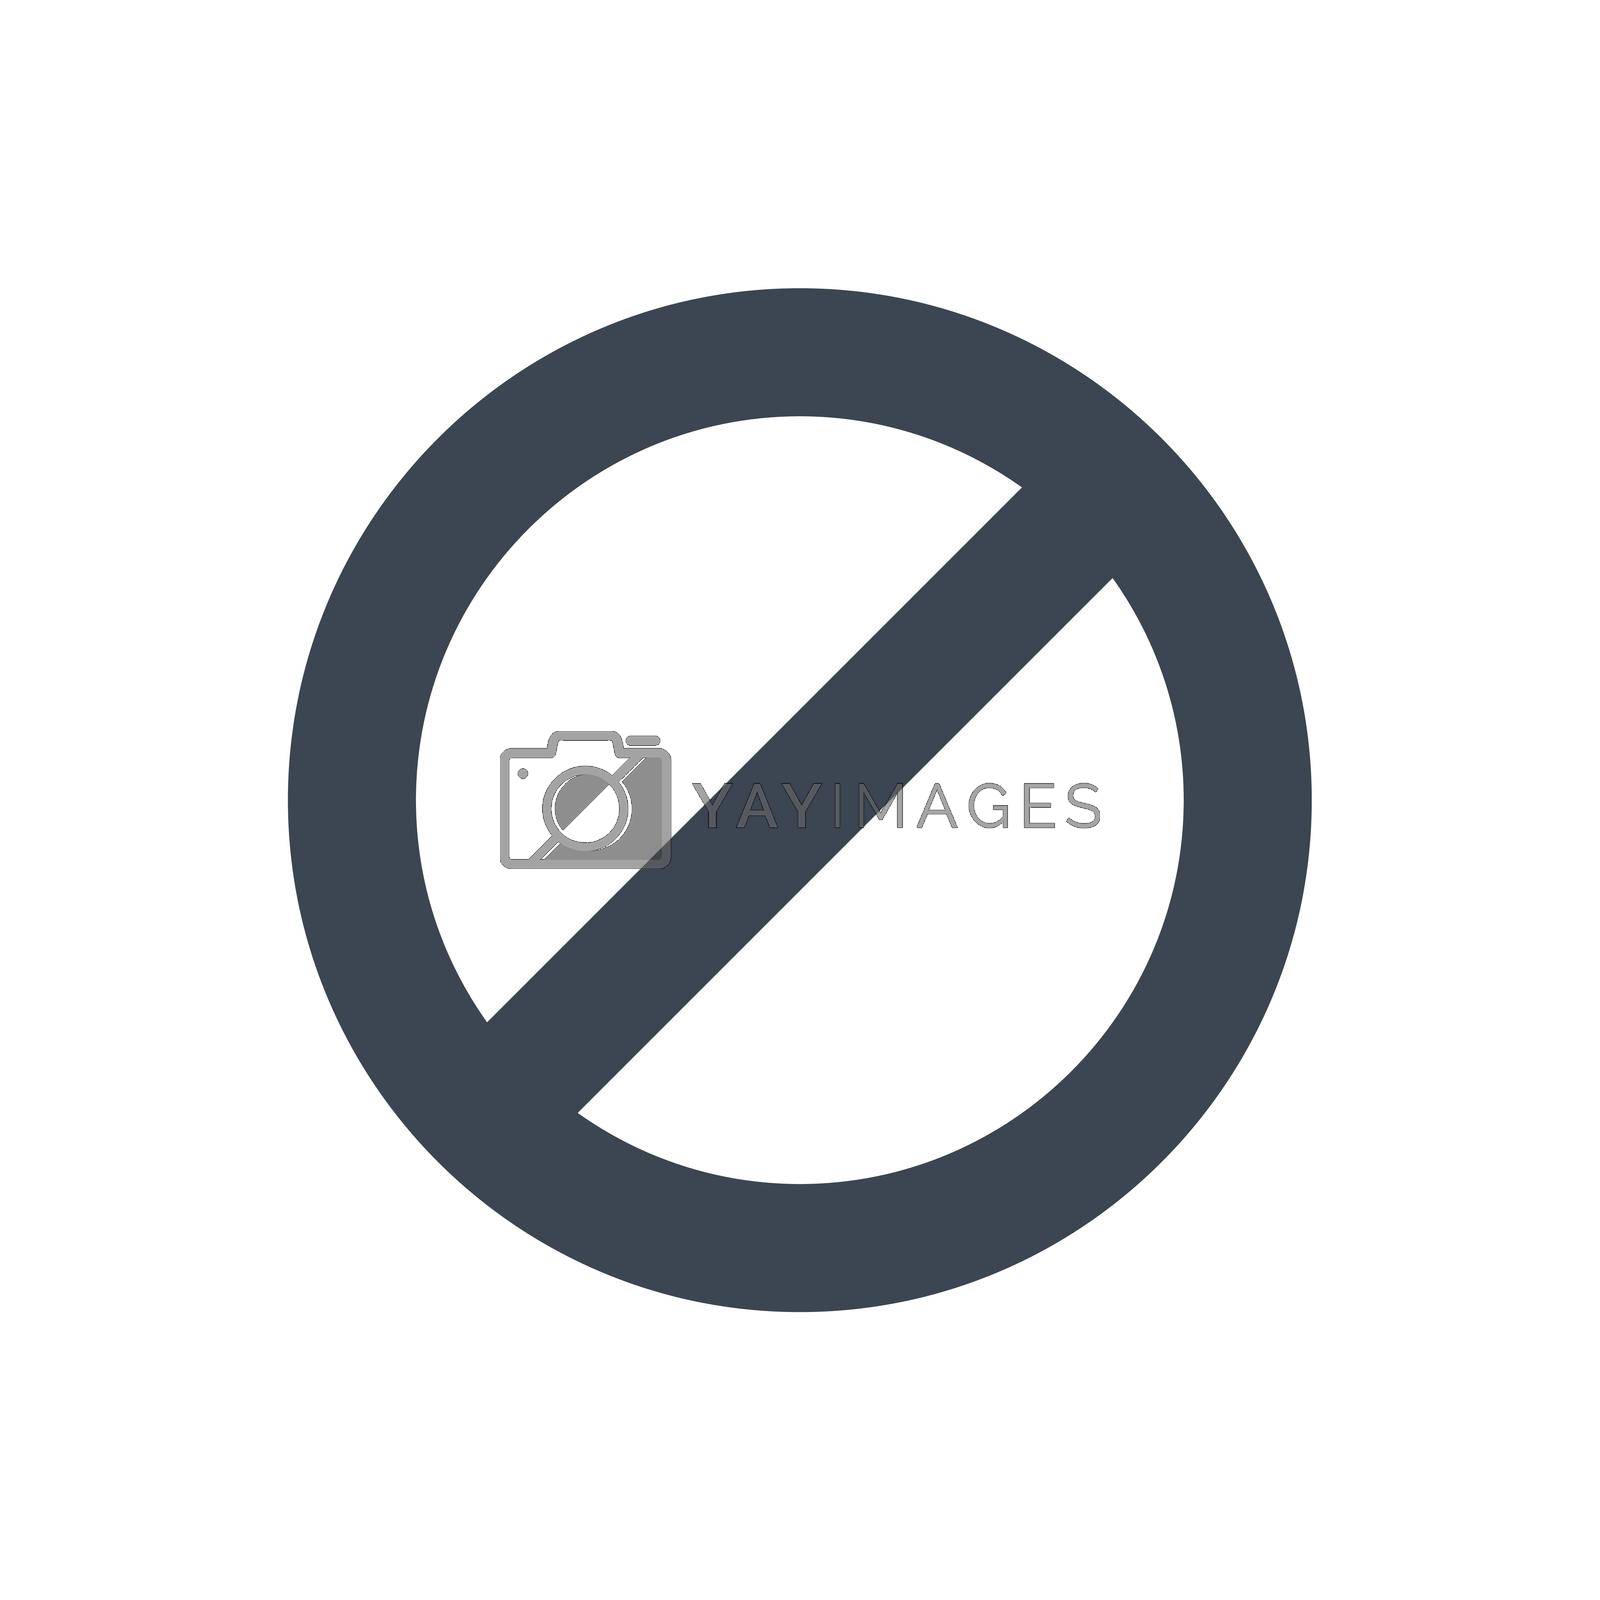 Royalty free image of Ban sign related vector glyph icon by smoki